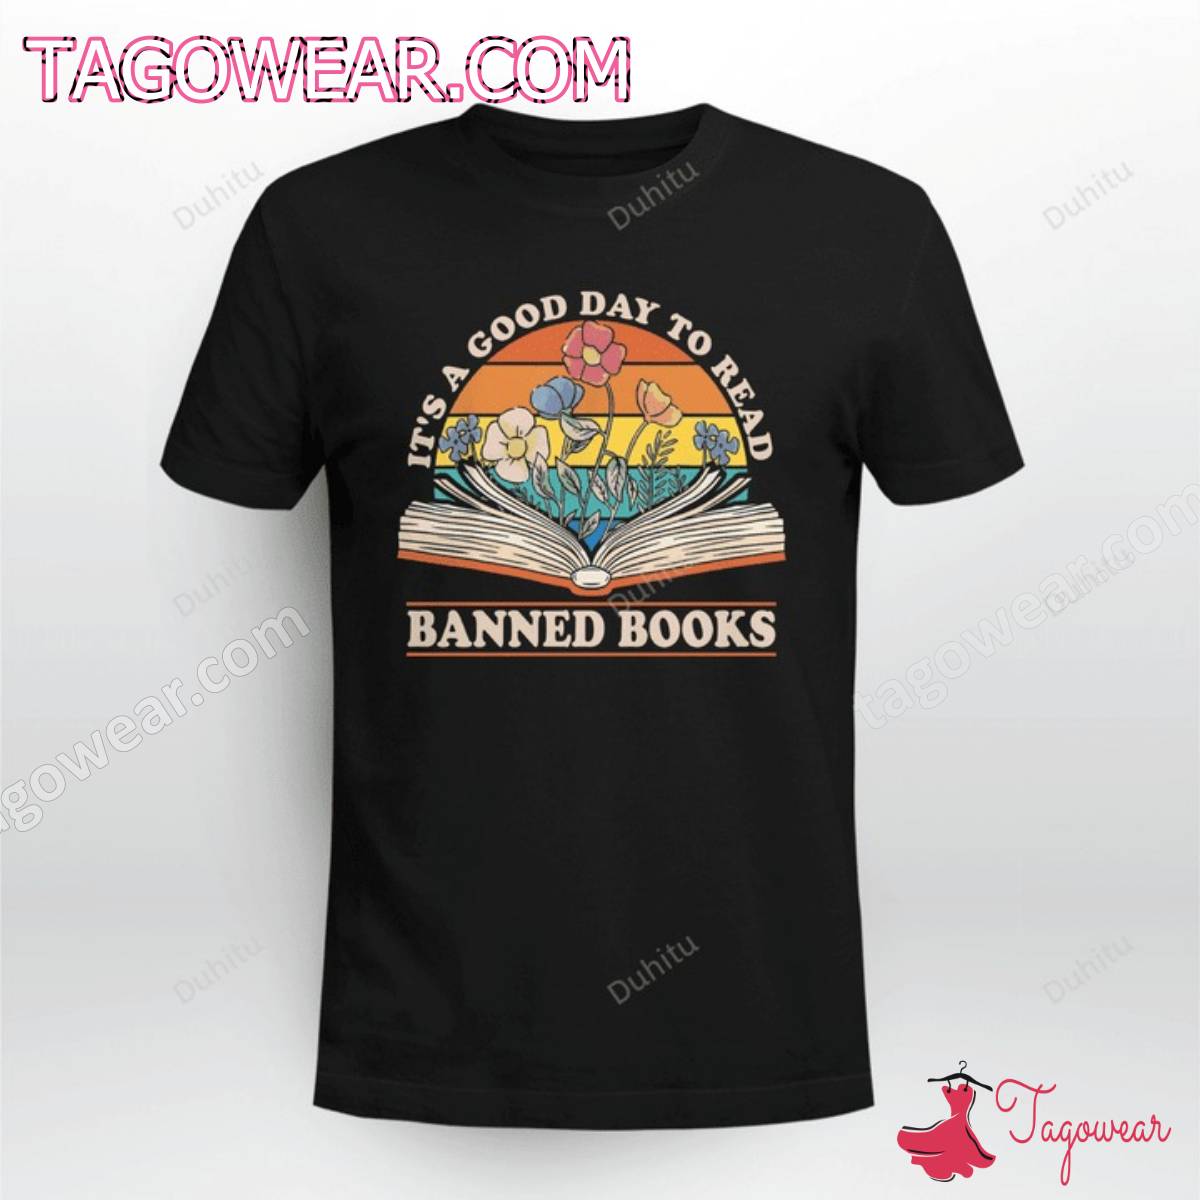 It's A Good Day To Read Banned Books Shirt, Tank Top